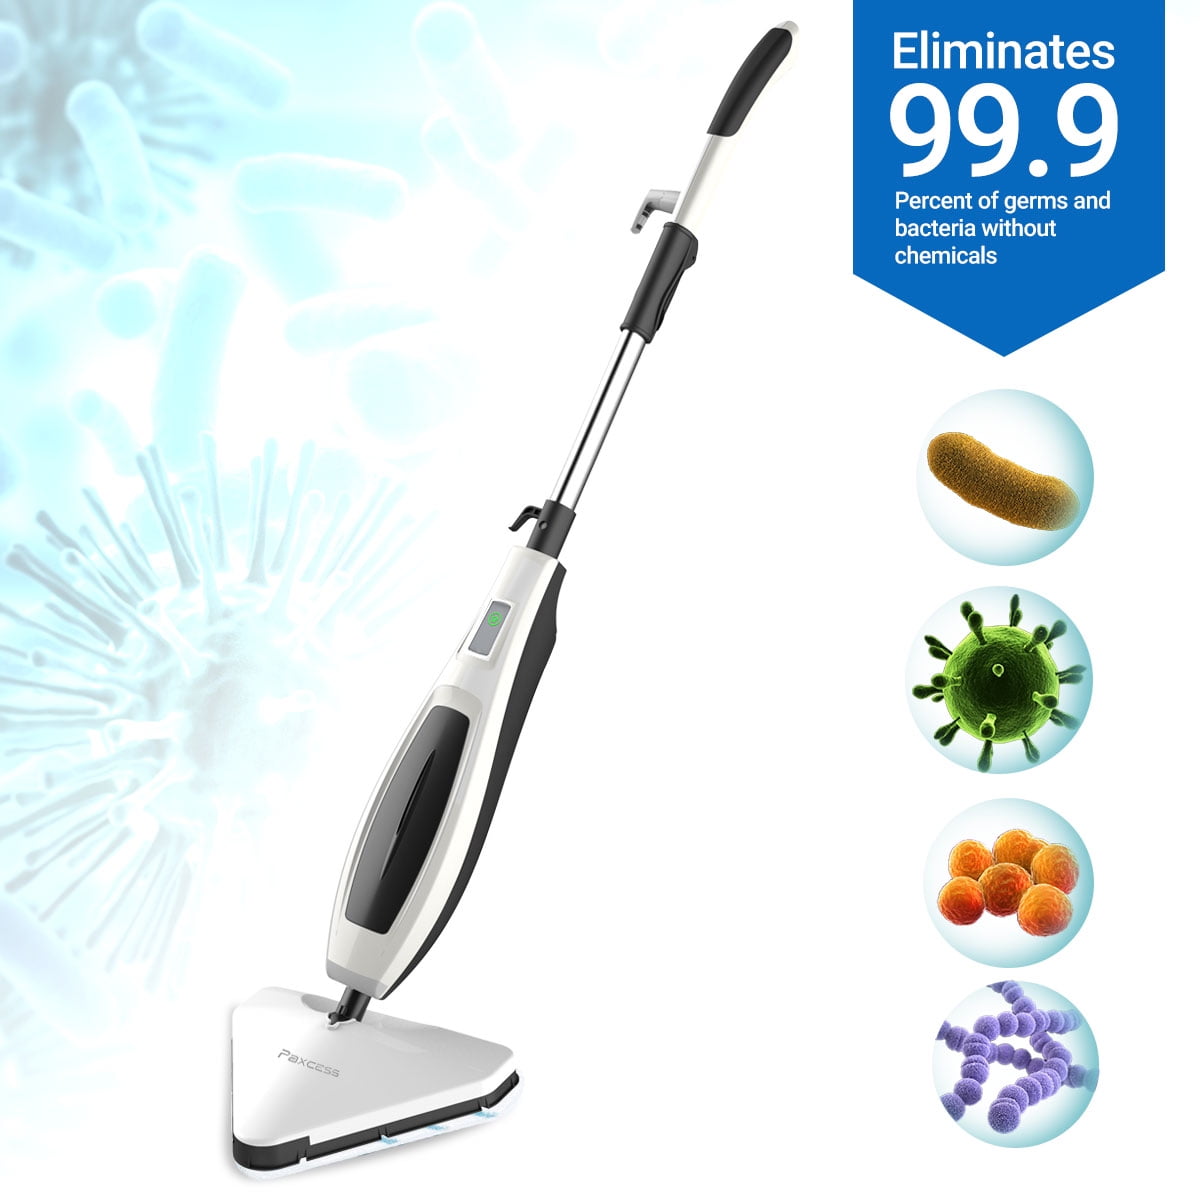 Paxcess Steam Mop Powerful Floor, Steam Cleaners For Floors And Tiles